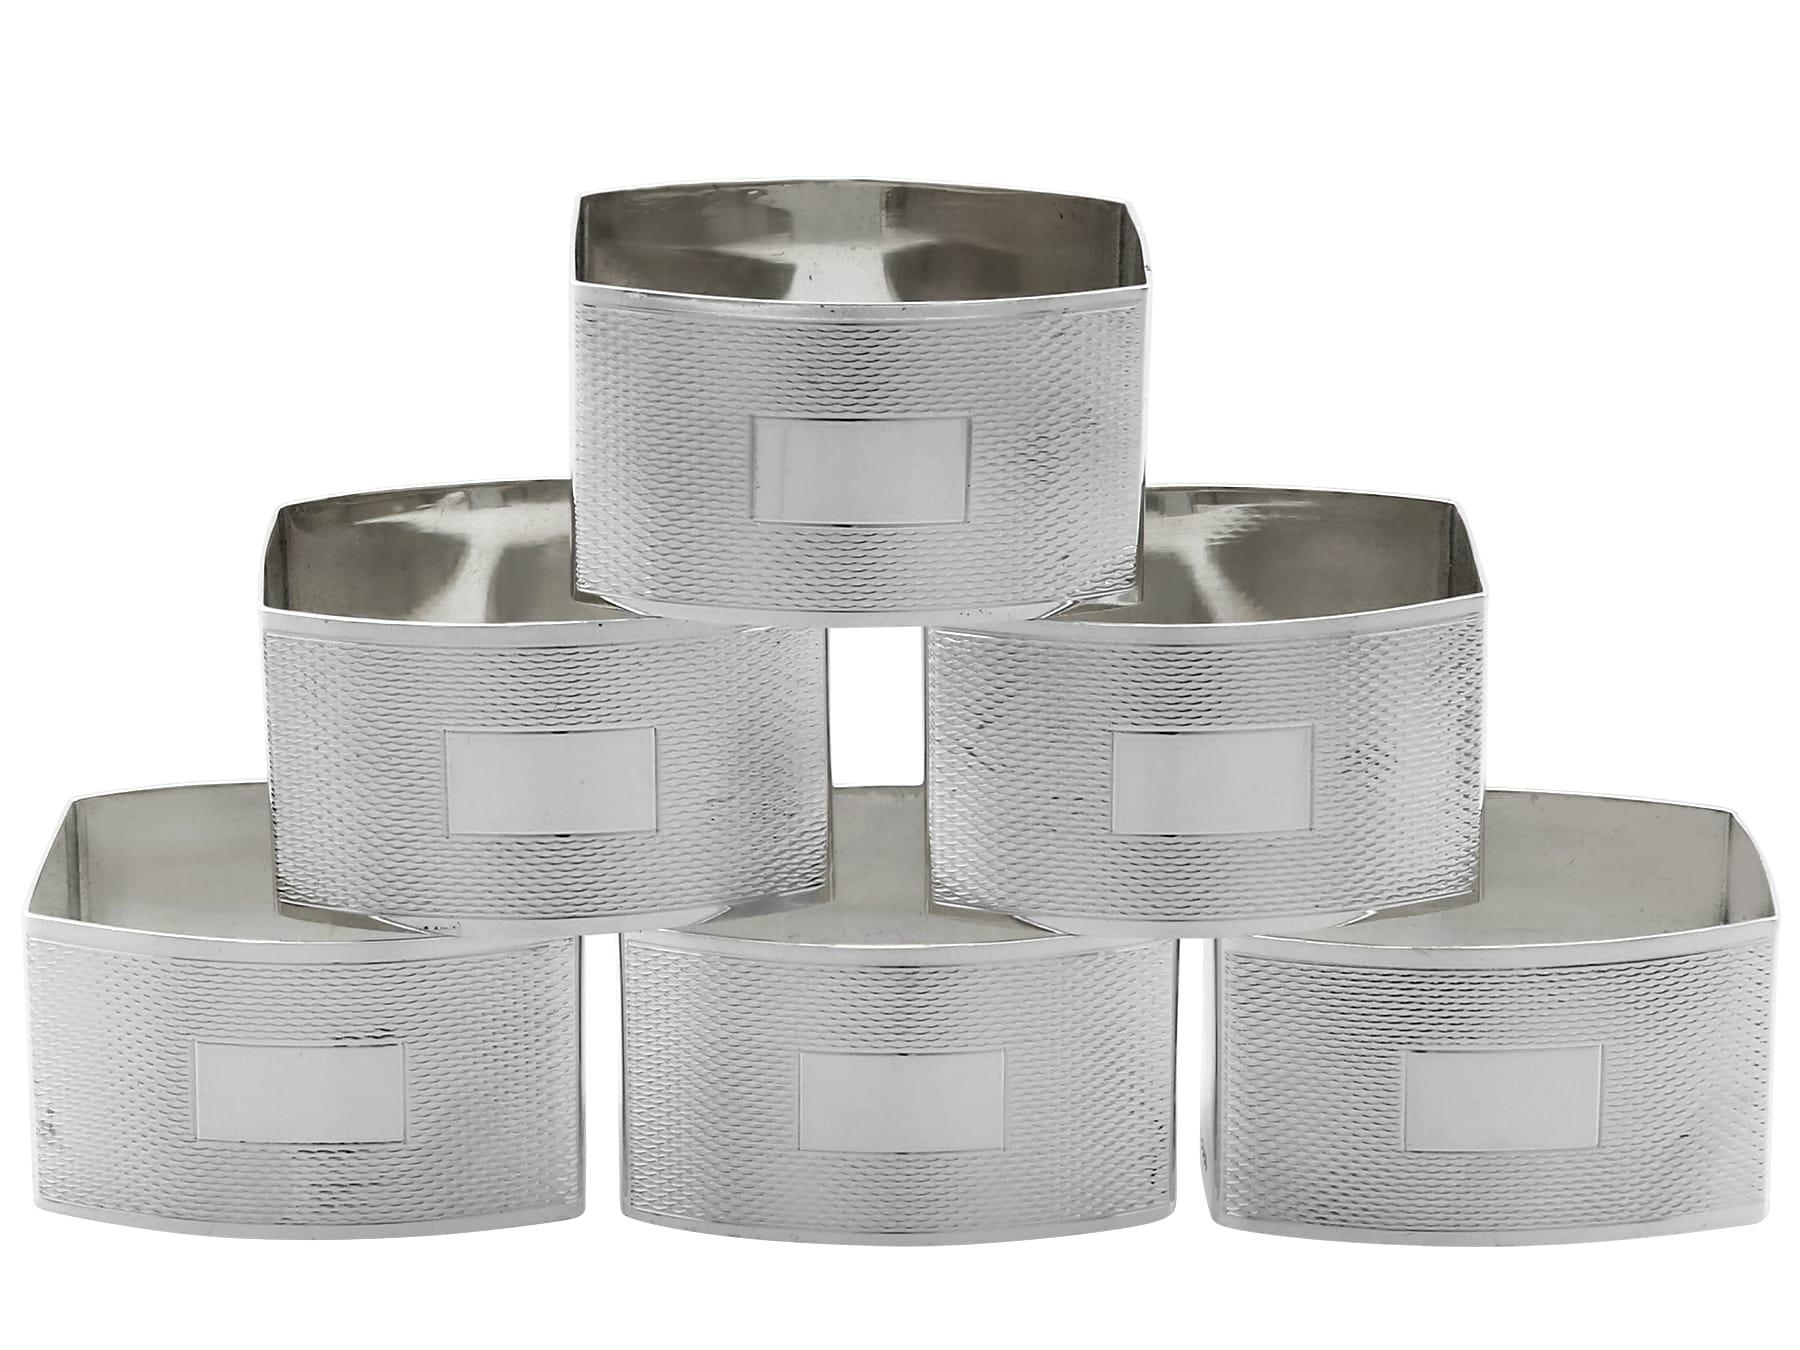 An exceptional, fine and impressive set of six vintage Elizabeth II English sterling silver napkin rings - boxed; part of our dining silverware collection

These exceptional vintage English sterling silver napkin rings have a rectangular rounded